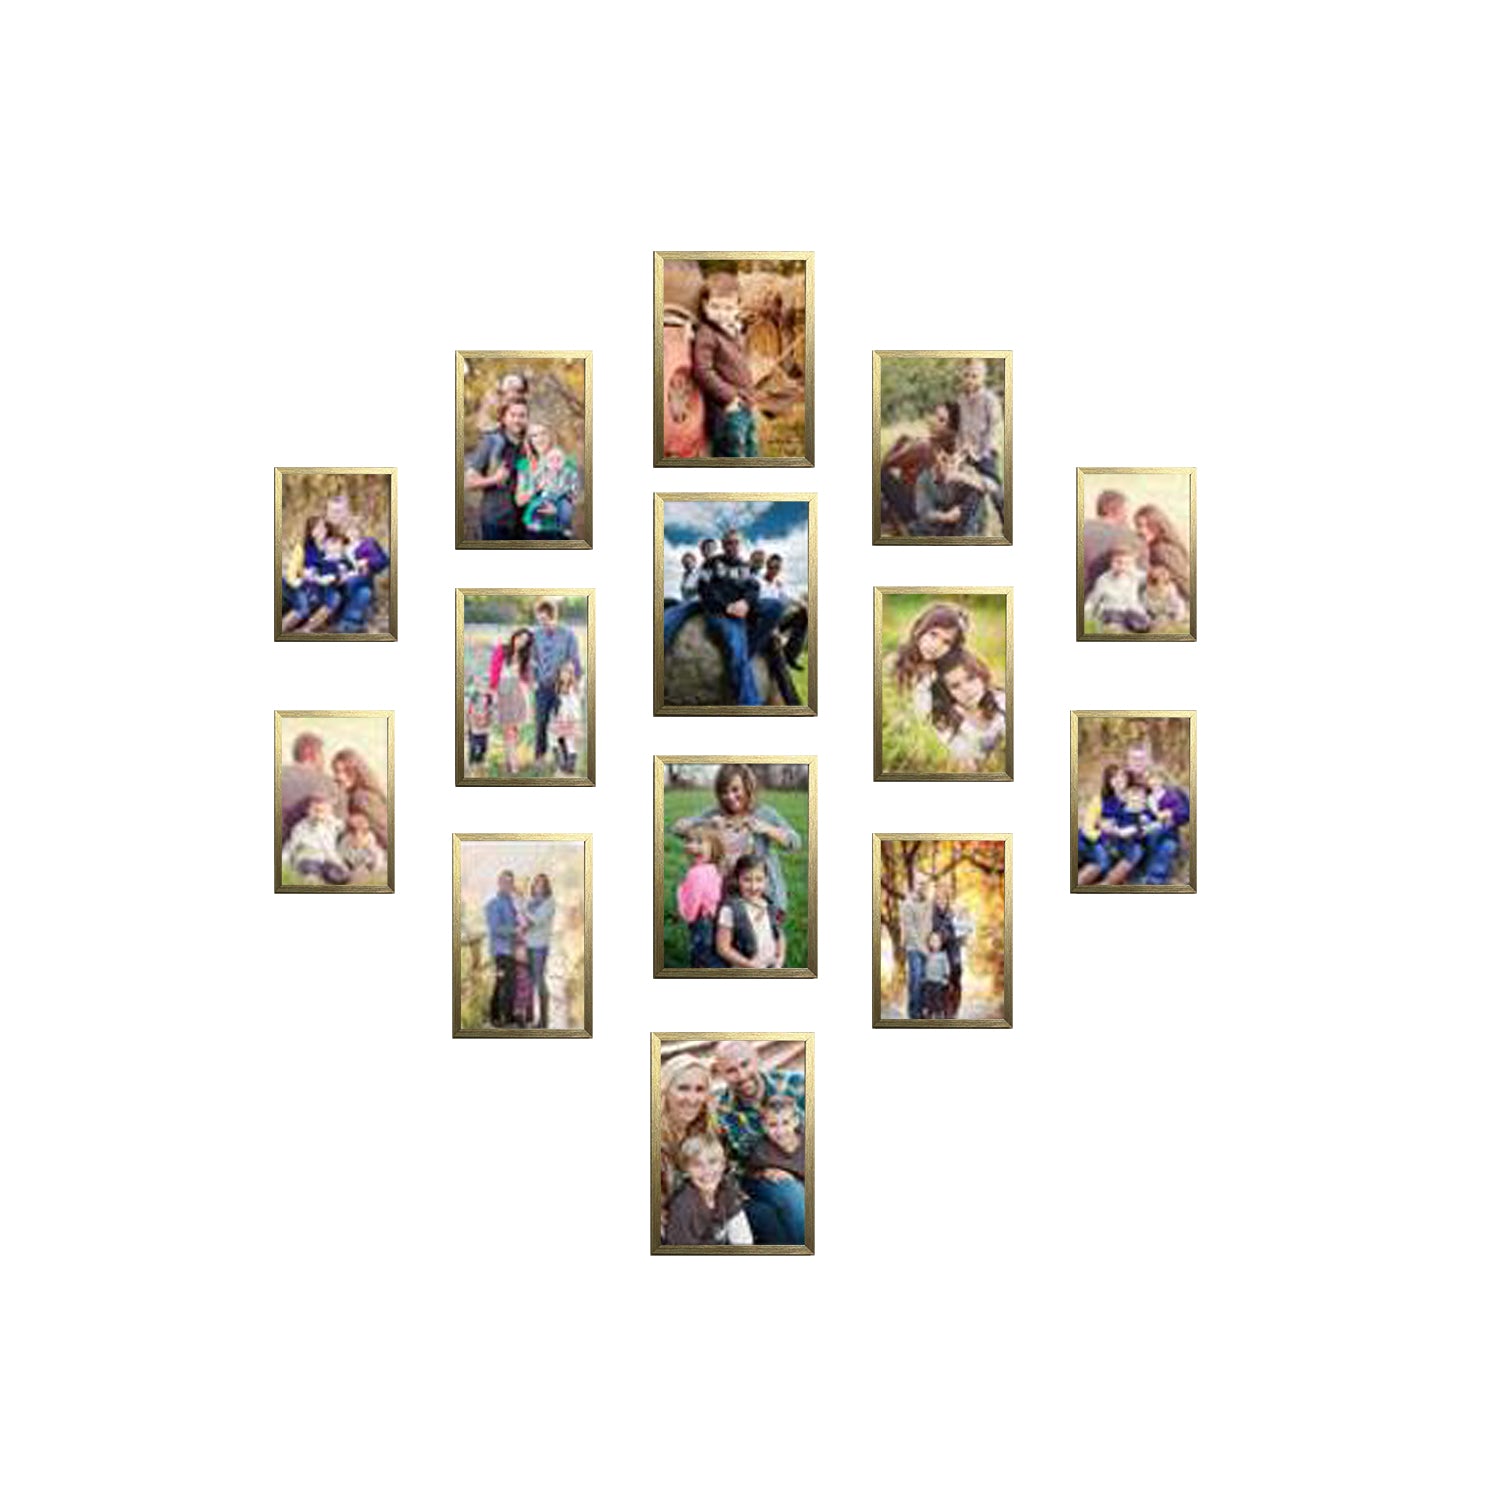 Buy golden Pack of 14 Pack Collage Photo Frames set, Custom Pics Free Print (5x7 - 4 Pc, 4x6 - 10 Pc)